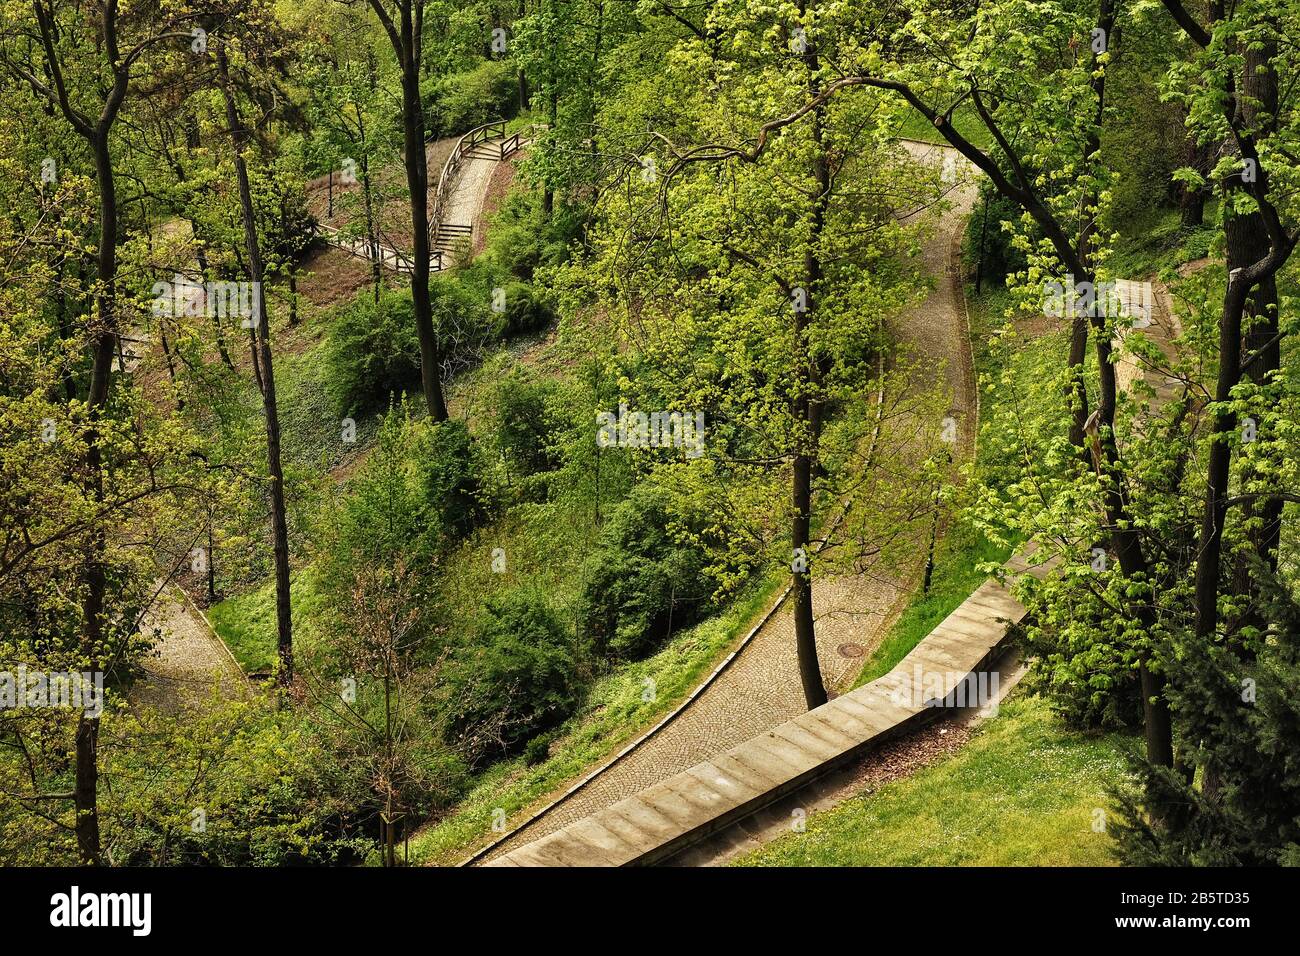 Tall thin trees, leafy green spring foliage, a zig zag switchback pathway winds down the steep hillside, Kinsky Garden, south-eastern slope of Petřín Stock Photo